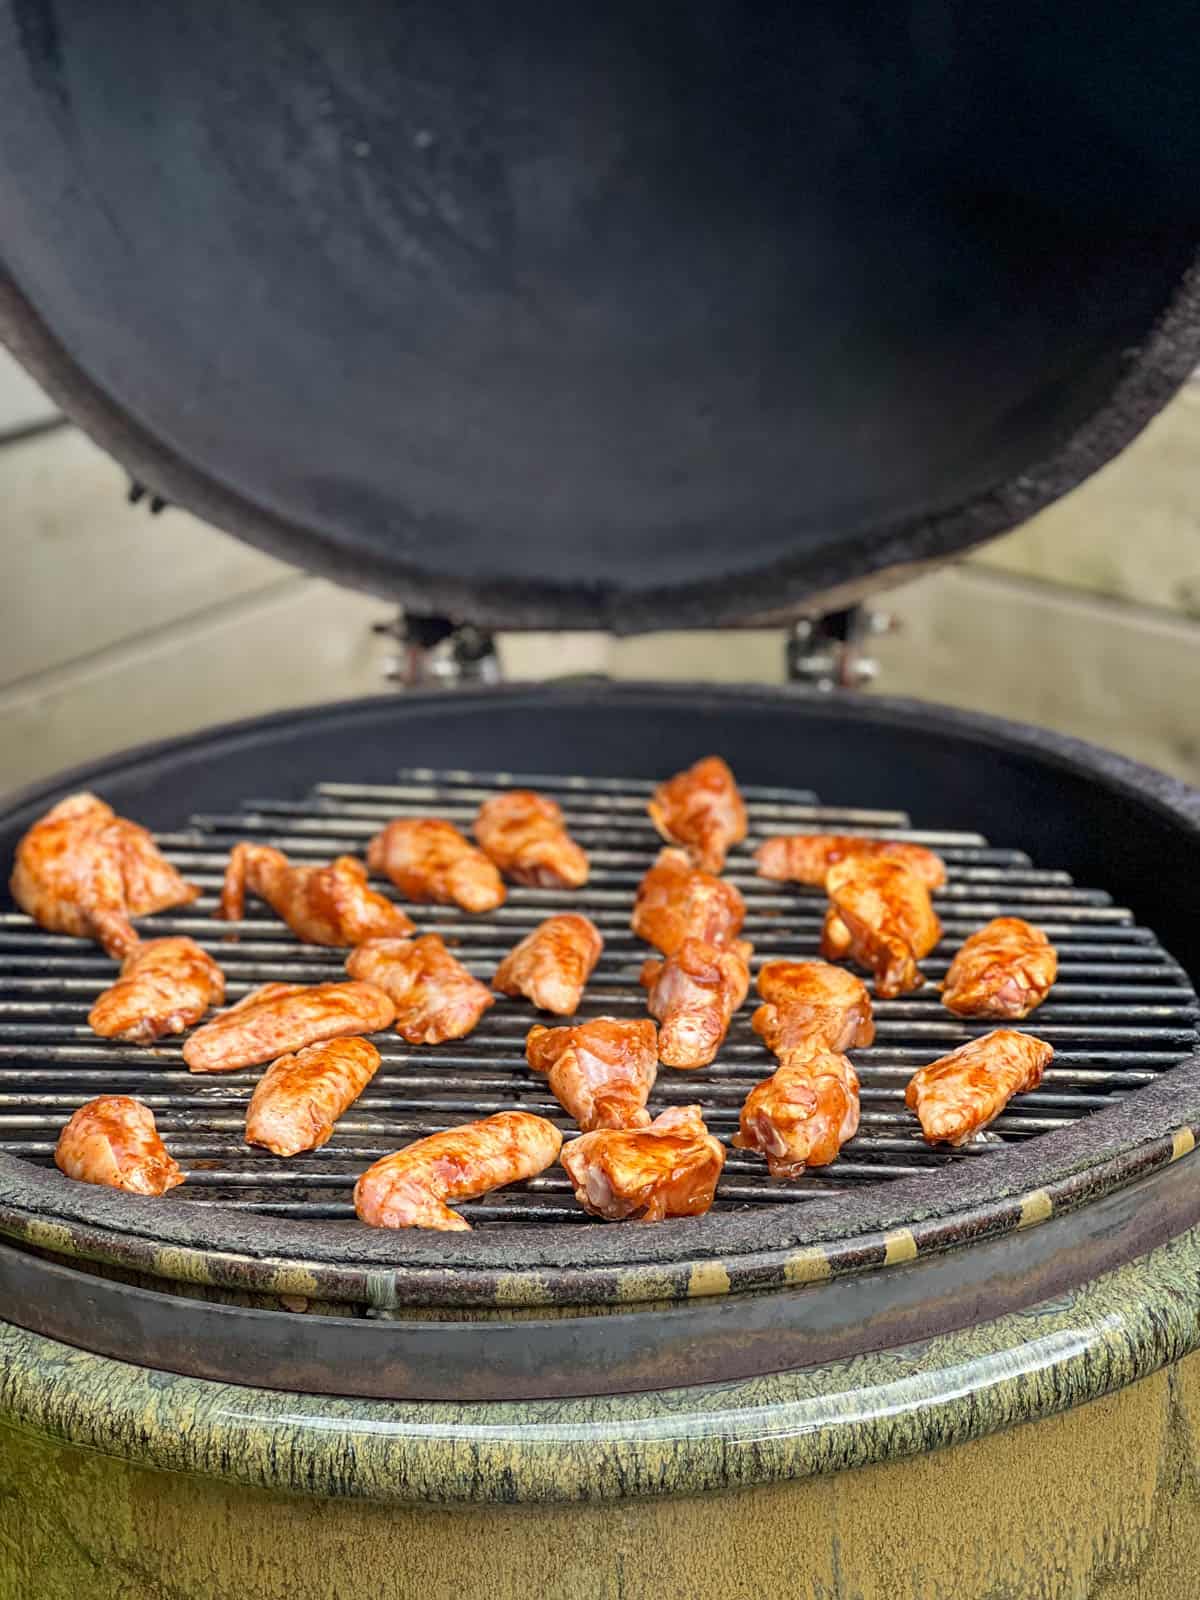 Raw chicken wings with dry rub marinate on smoker grill.